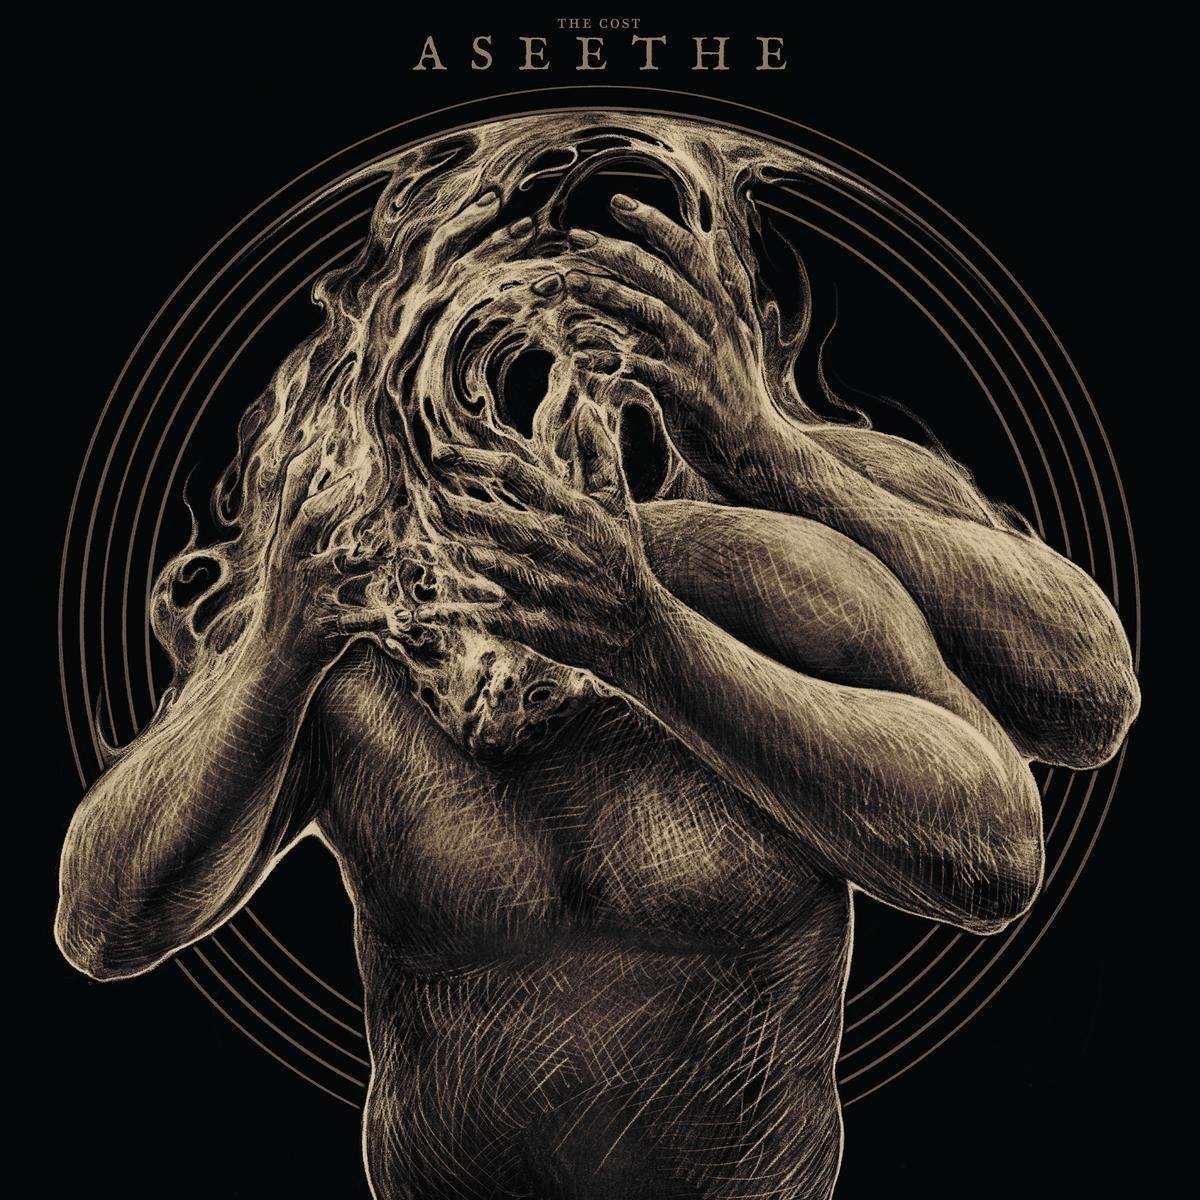 CD Shop - ASEETHE THE COST